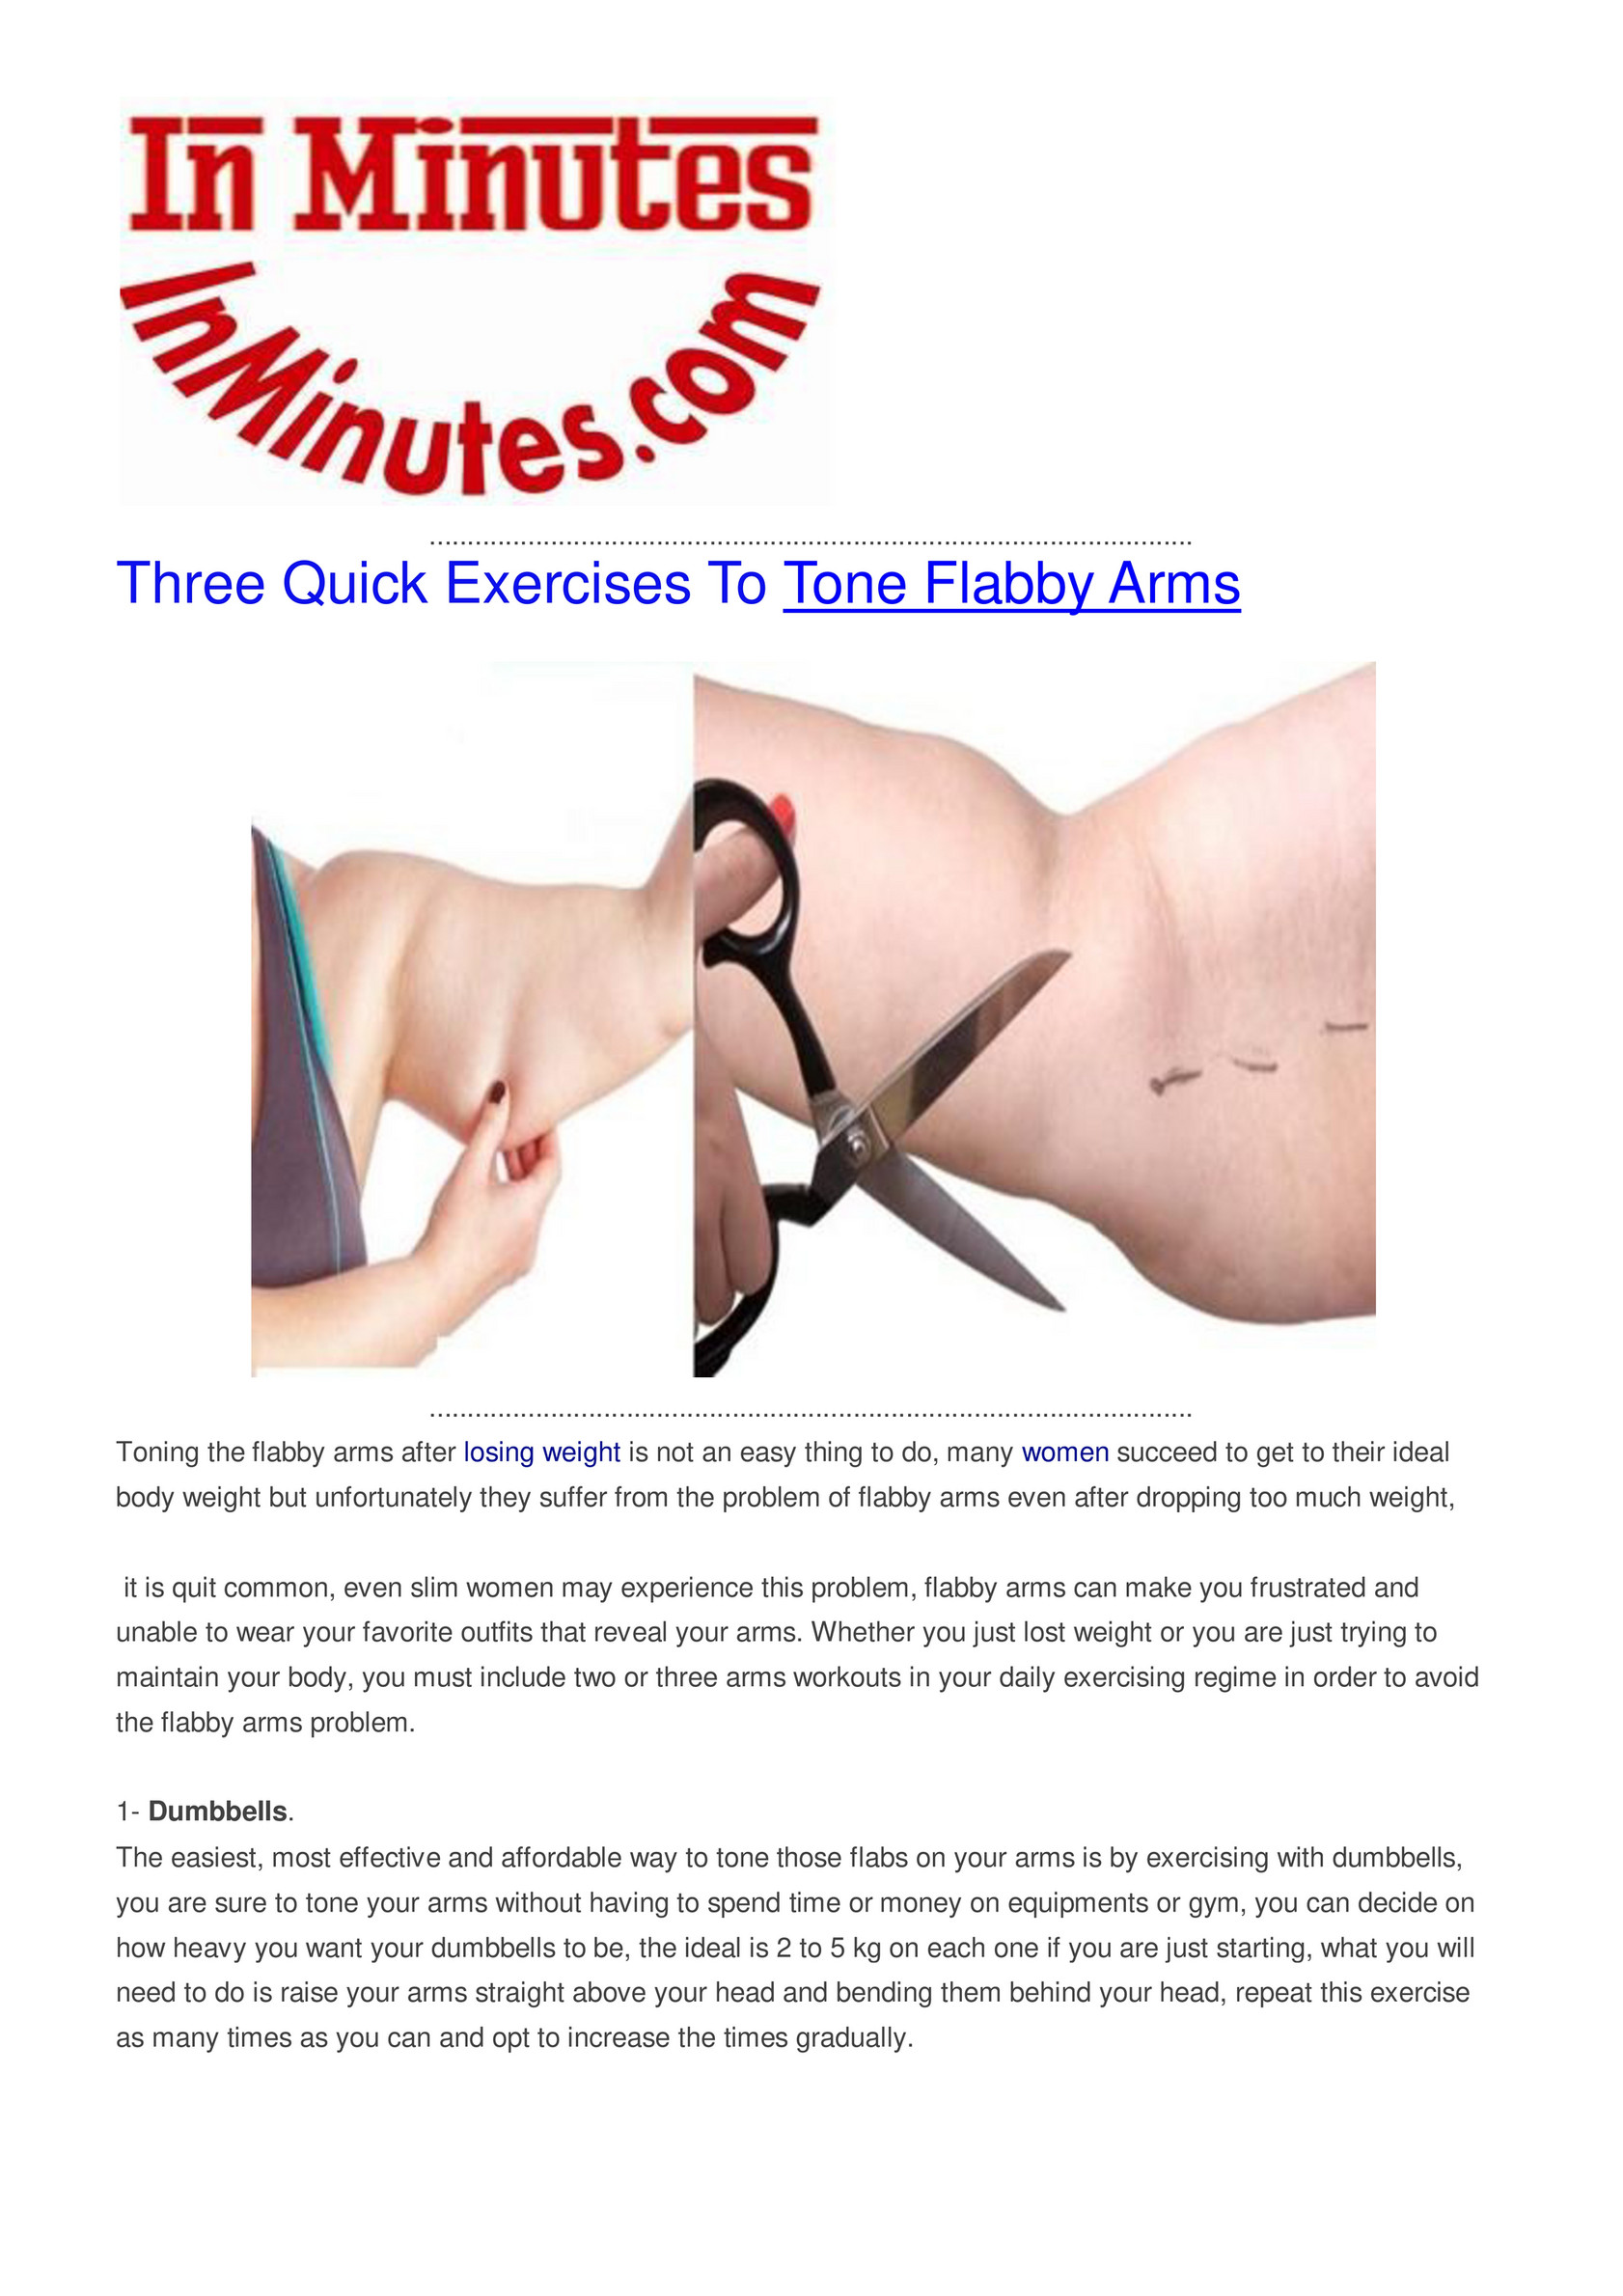 My publications - Three Quick Exercises To Tone Flabby Arms - Page 1 -  Created with Publitas.com